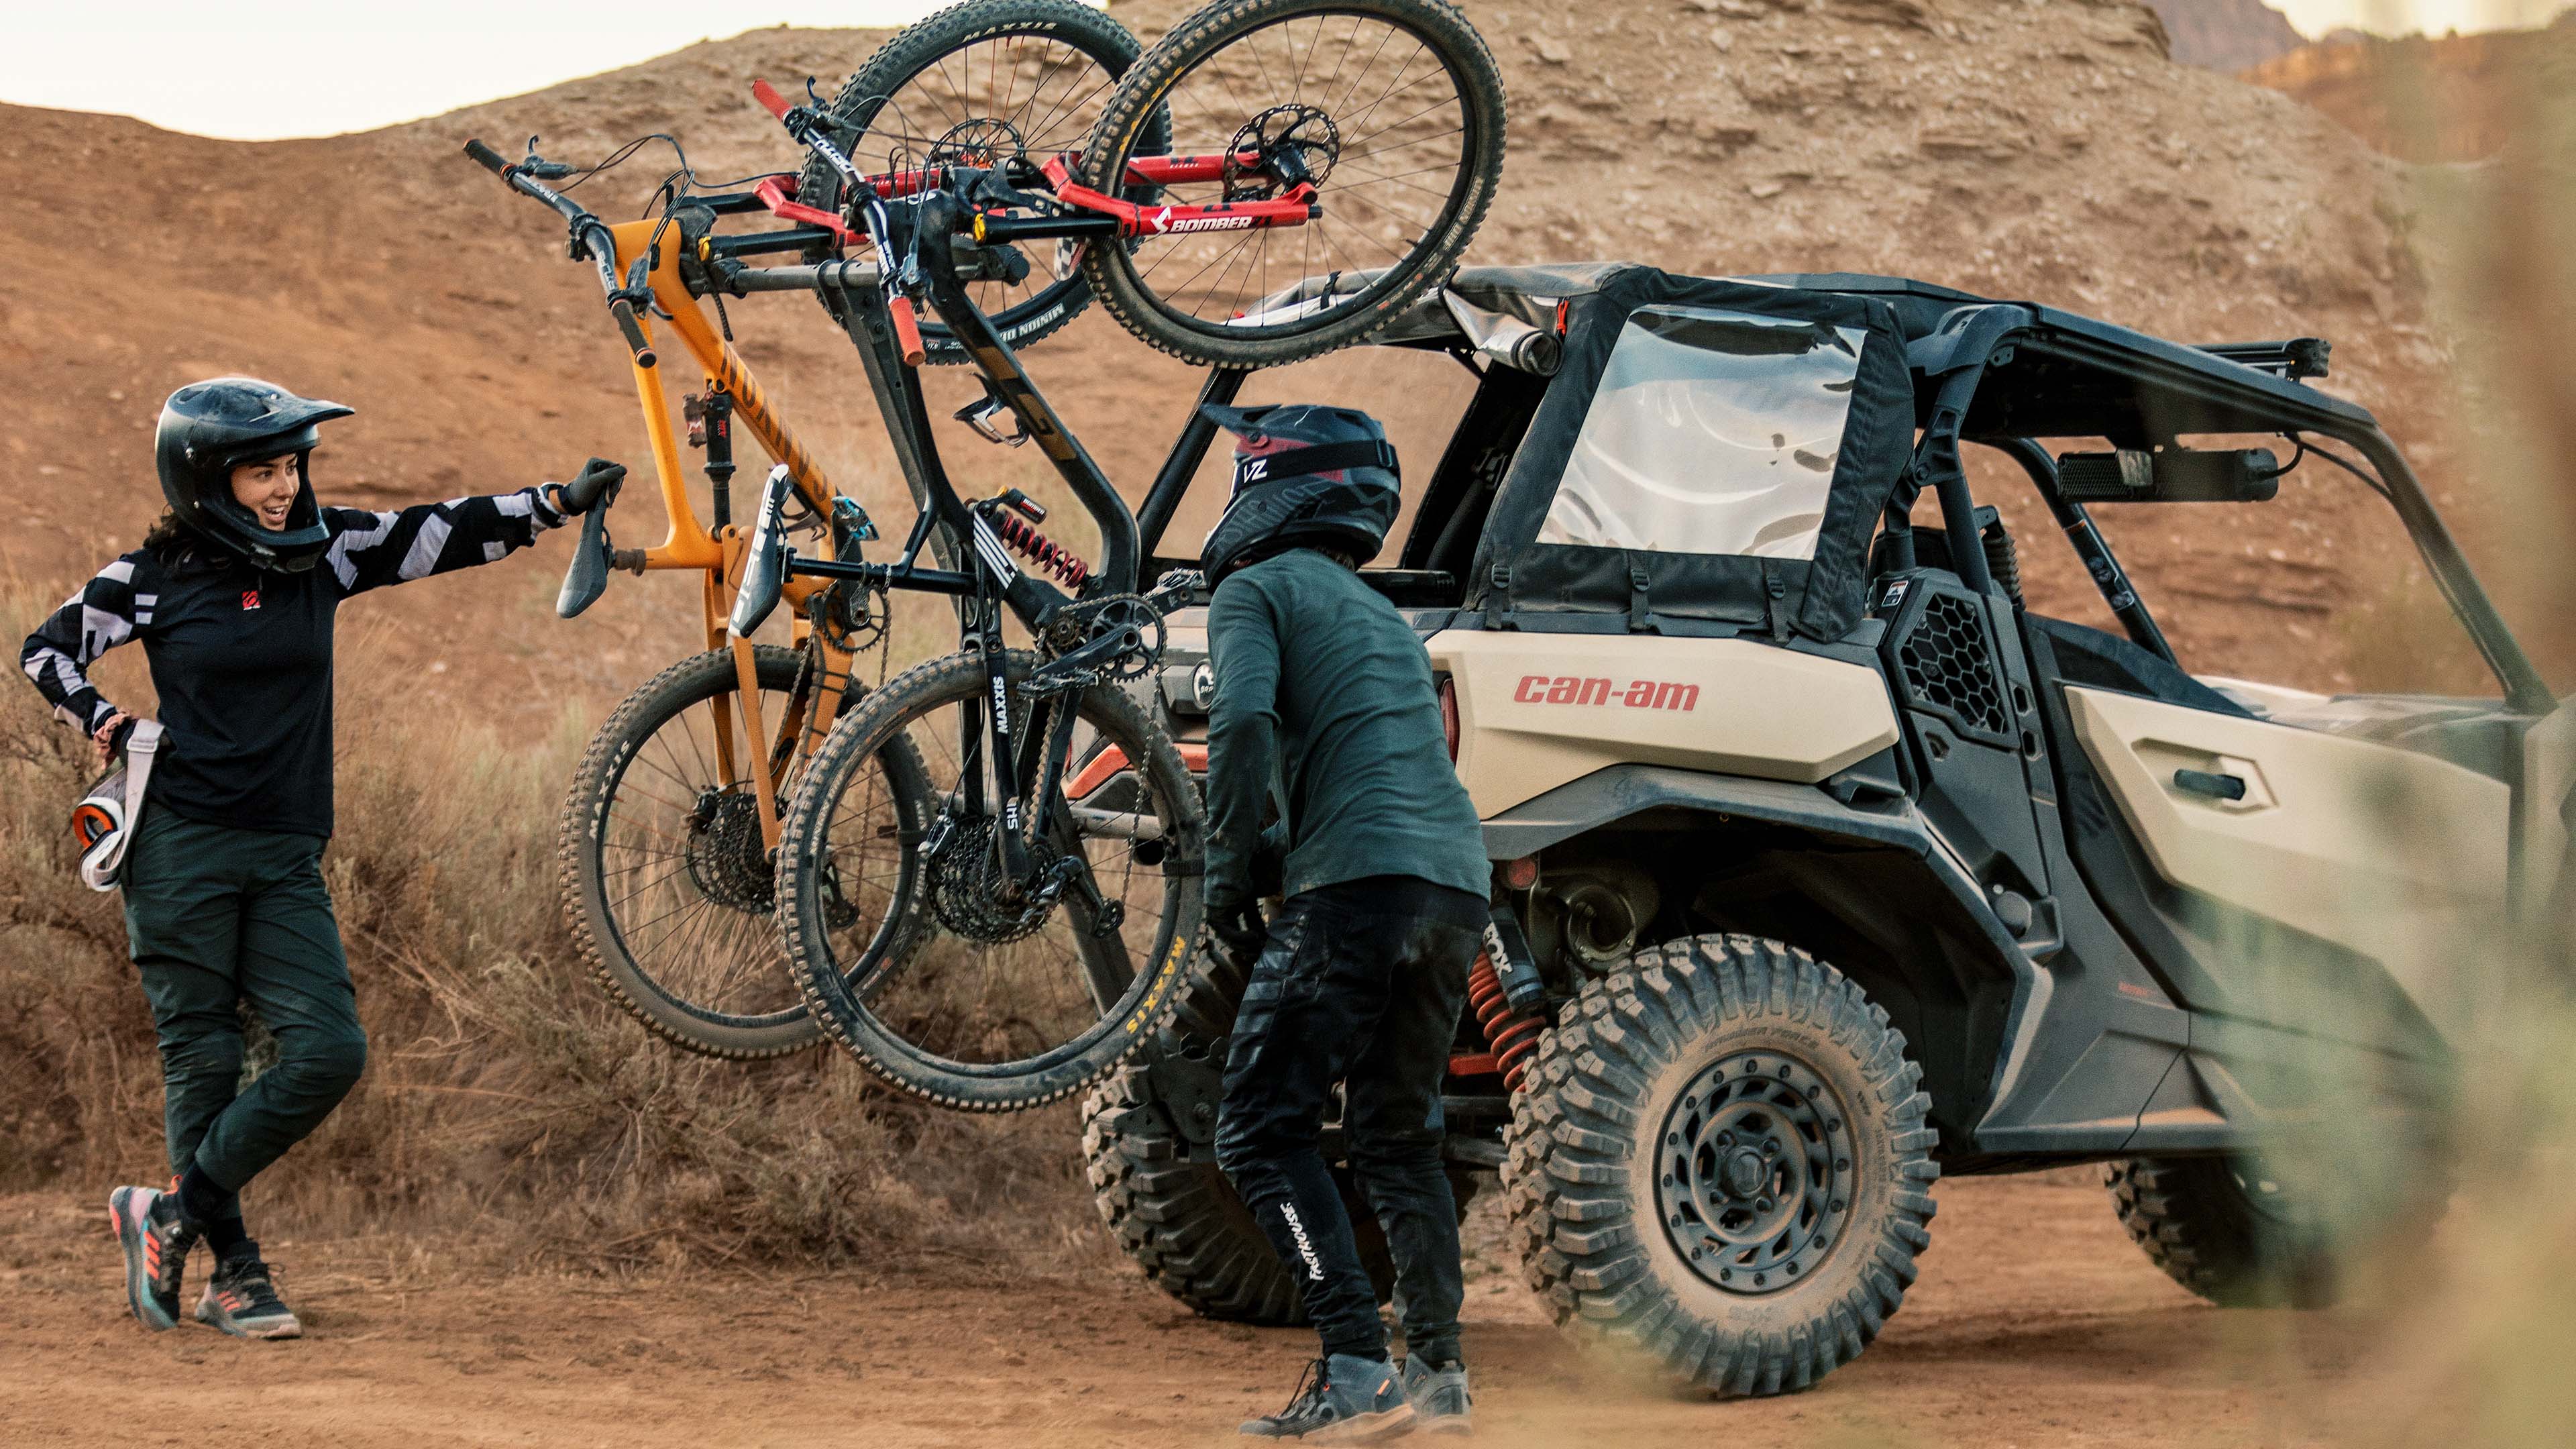 Friends loading up mountain bikes onto a Commander